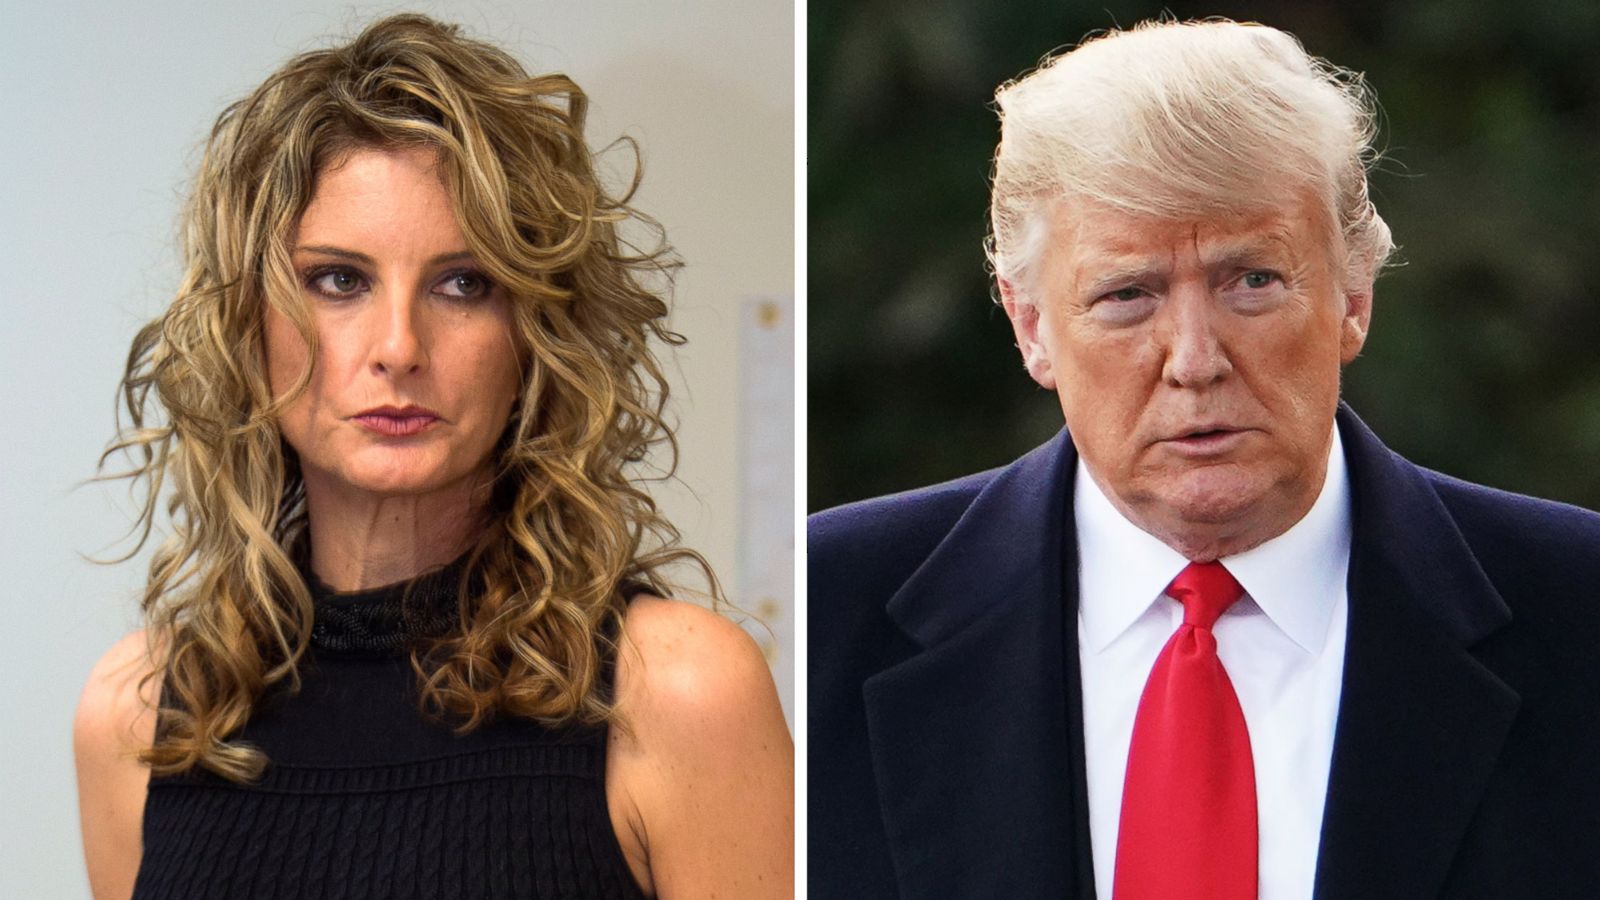 Phone records provide irrefutable proof of sexual assault allegations against Trump, lawyer says